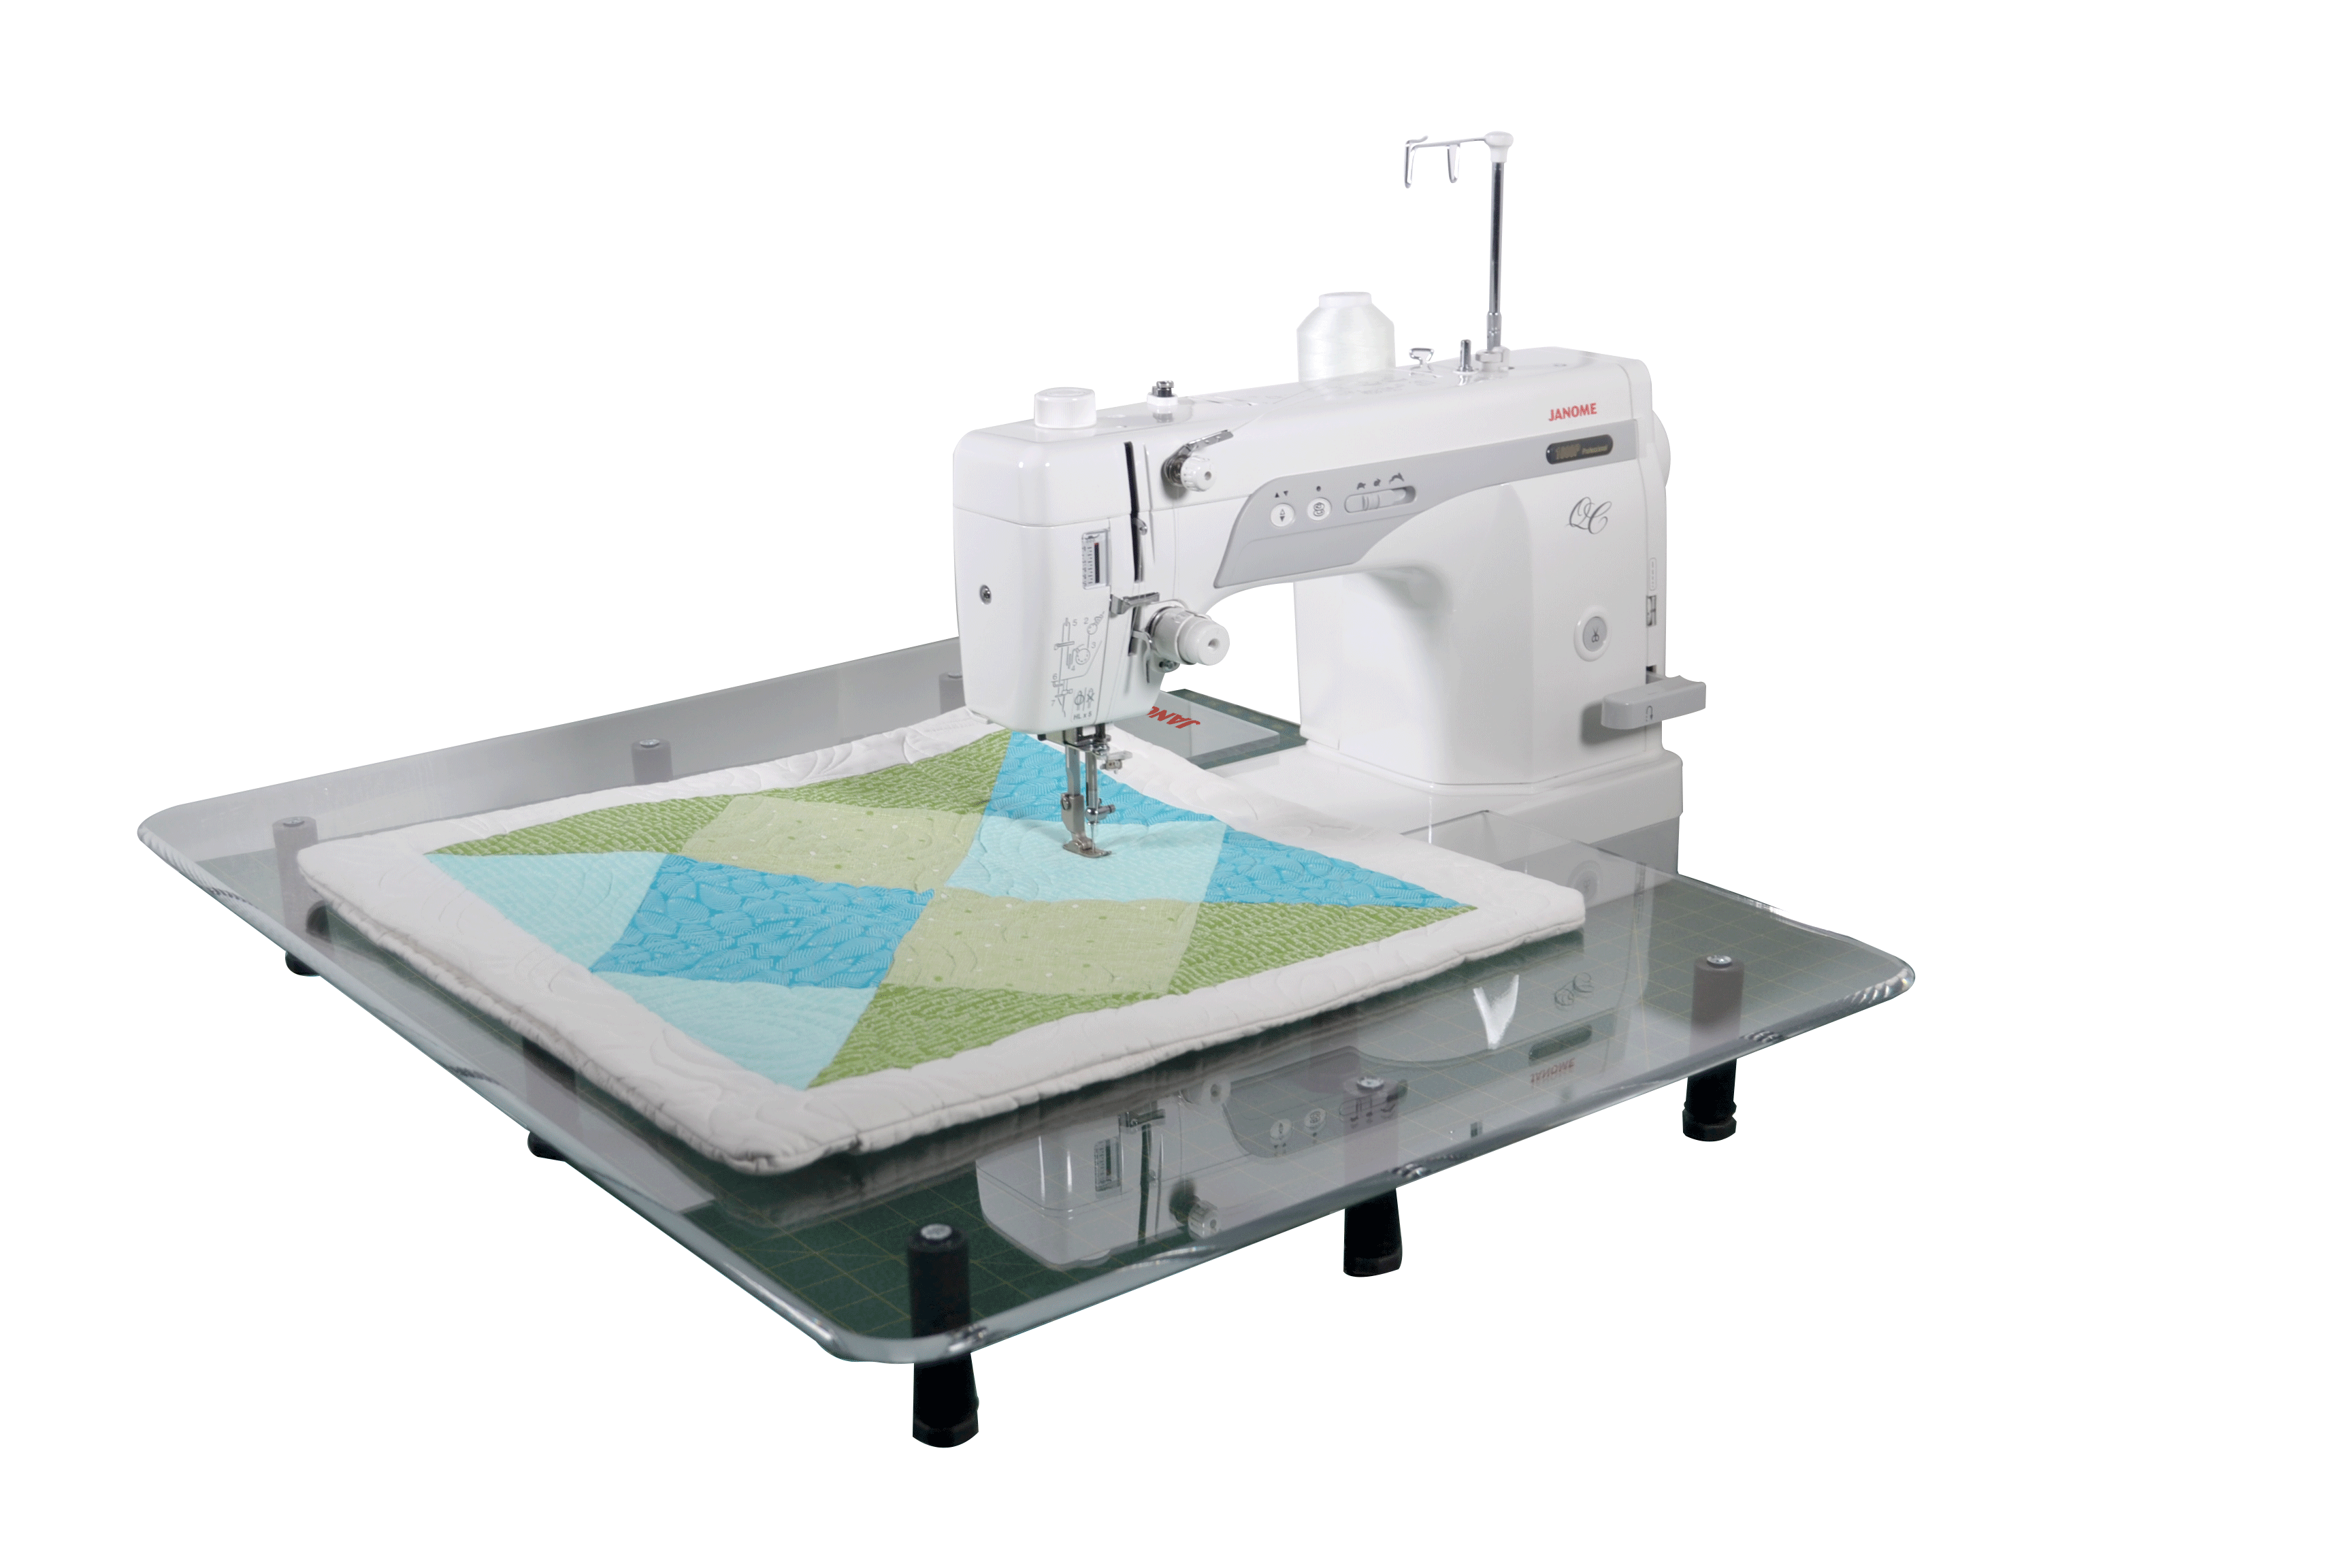 Amy's Free Motion Quilting Adventures: How to Make a Sewing Machine Table:  Great for Free Motion Quilting